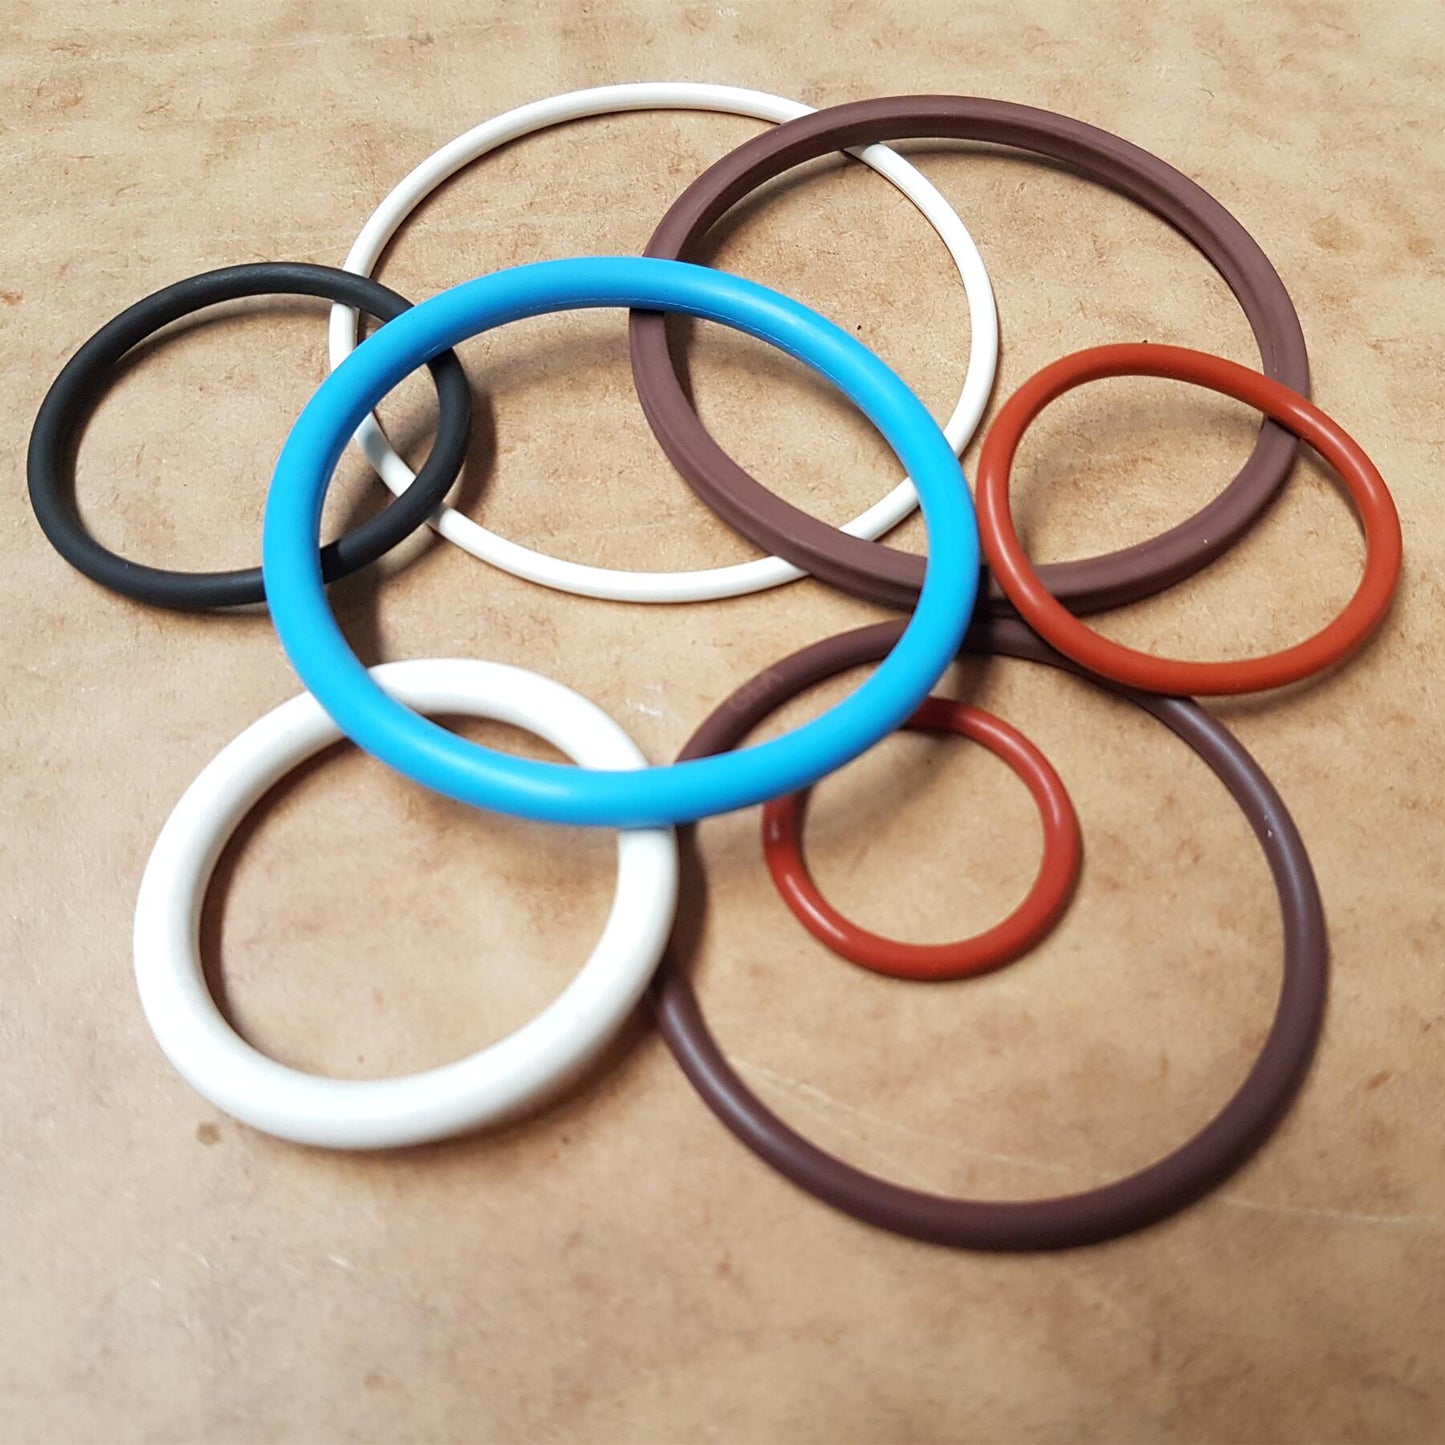 L. VMQ Silicone Rubber Seal Ring Series